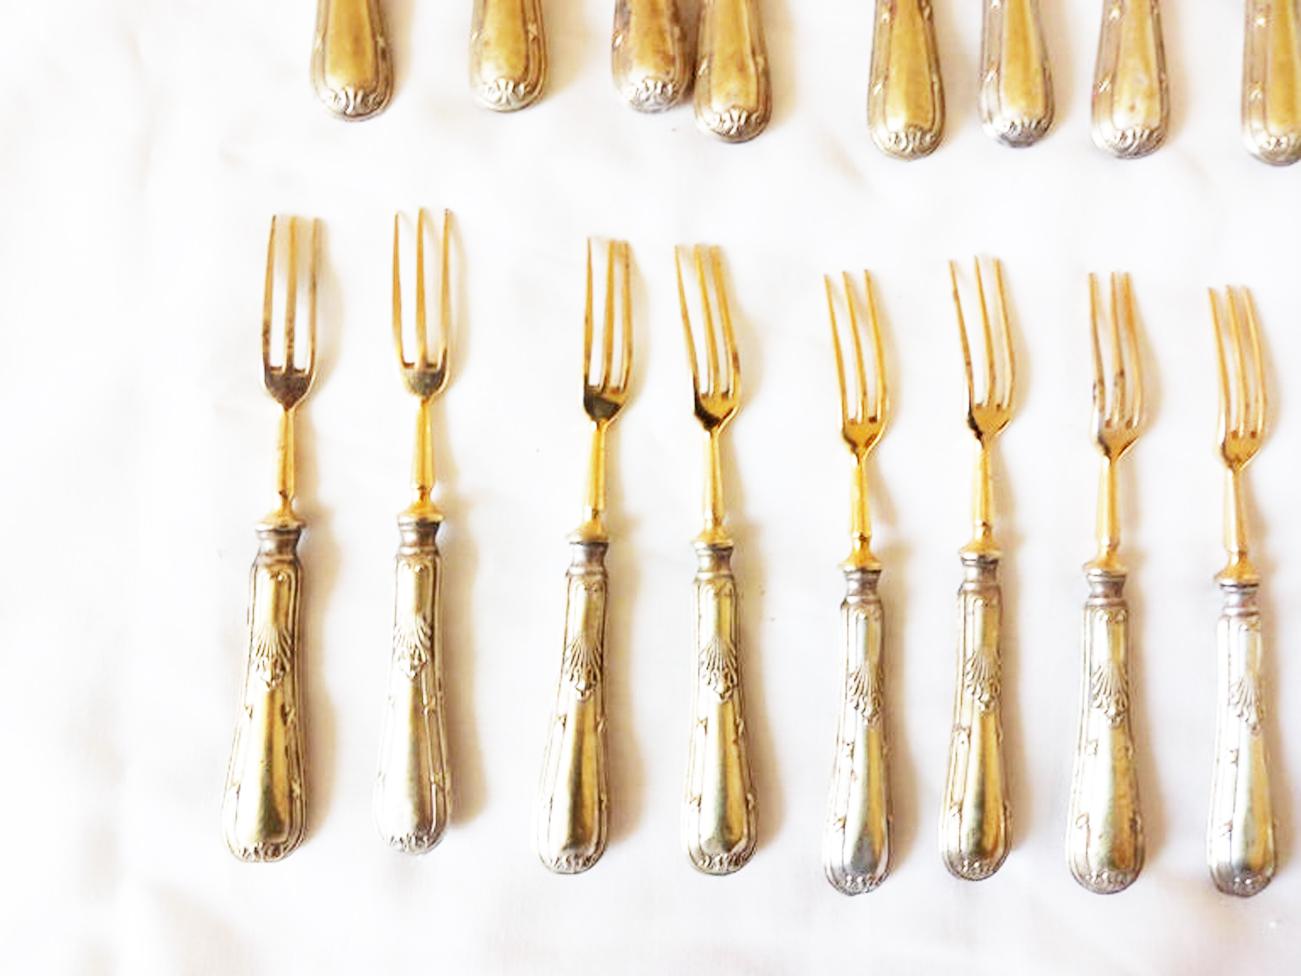 Brass Silver Dessert Serving Pieces, Forks Dessert Knives Early 20th Art Deco For Sale 7